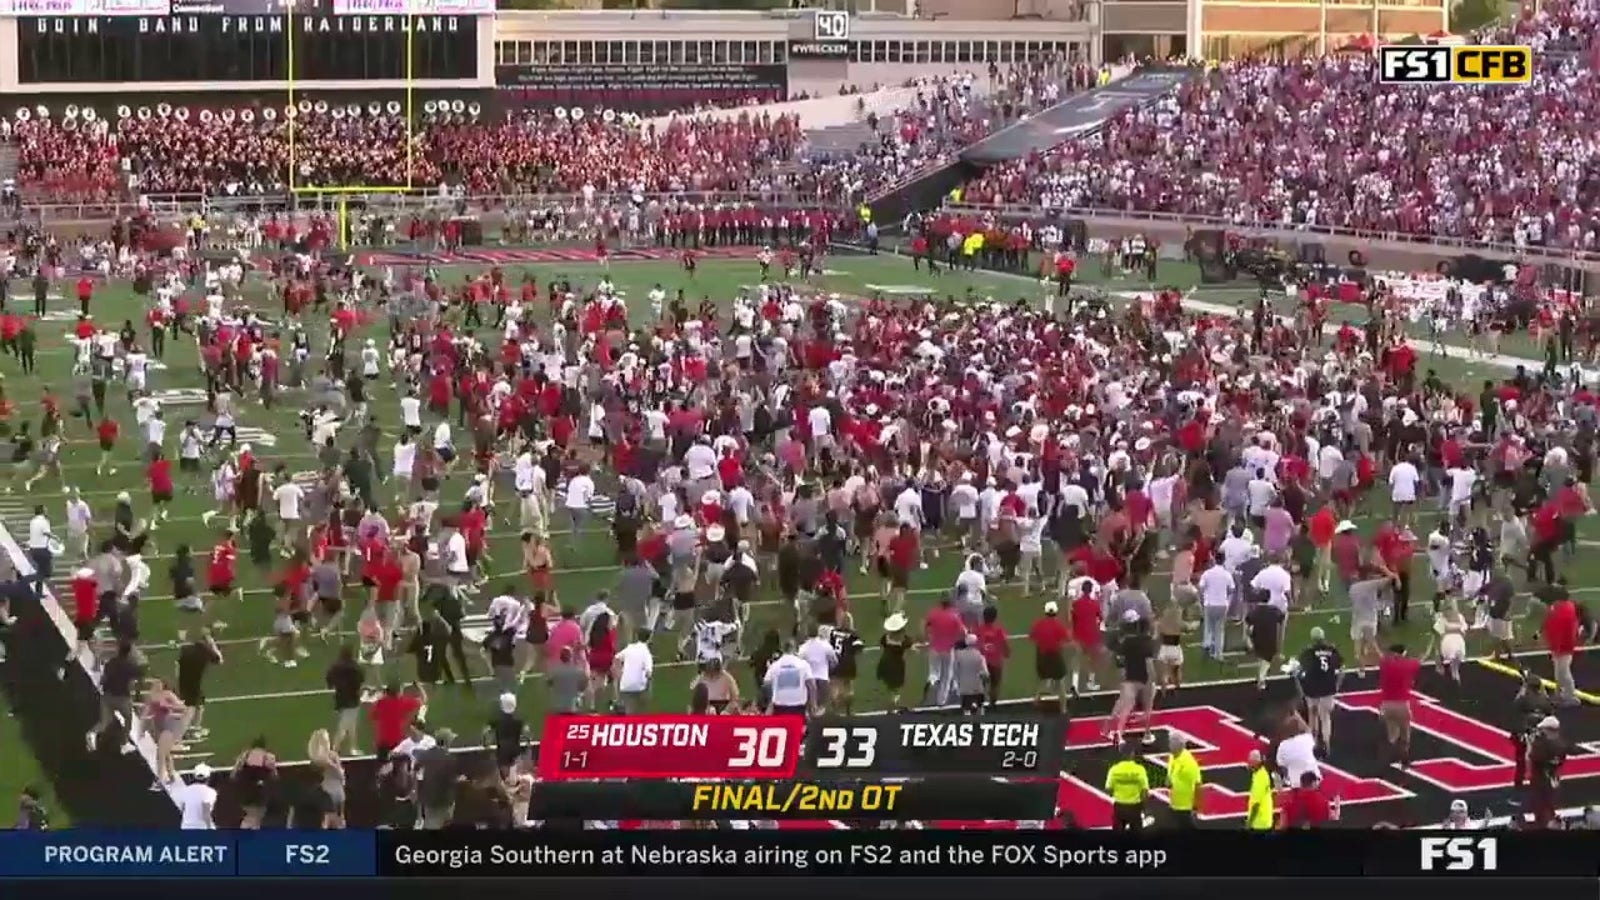 Tech fans flock to the pitch to celebrate the upset